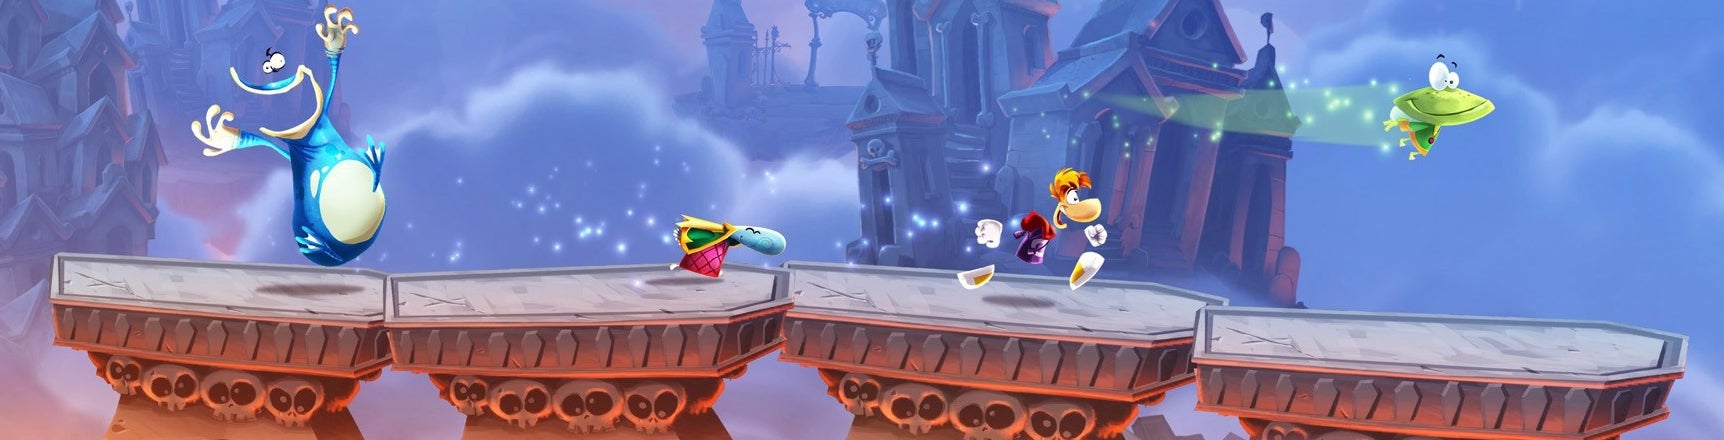 Image for Switch's Rayman Legends: Definitive Edition is far from definitive